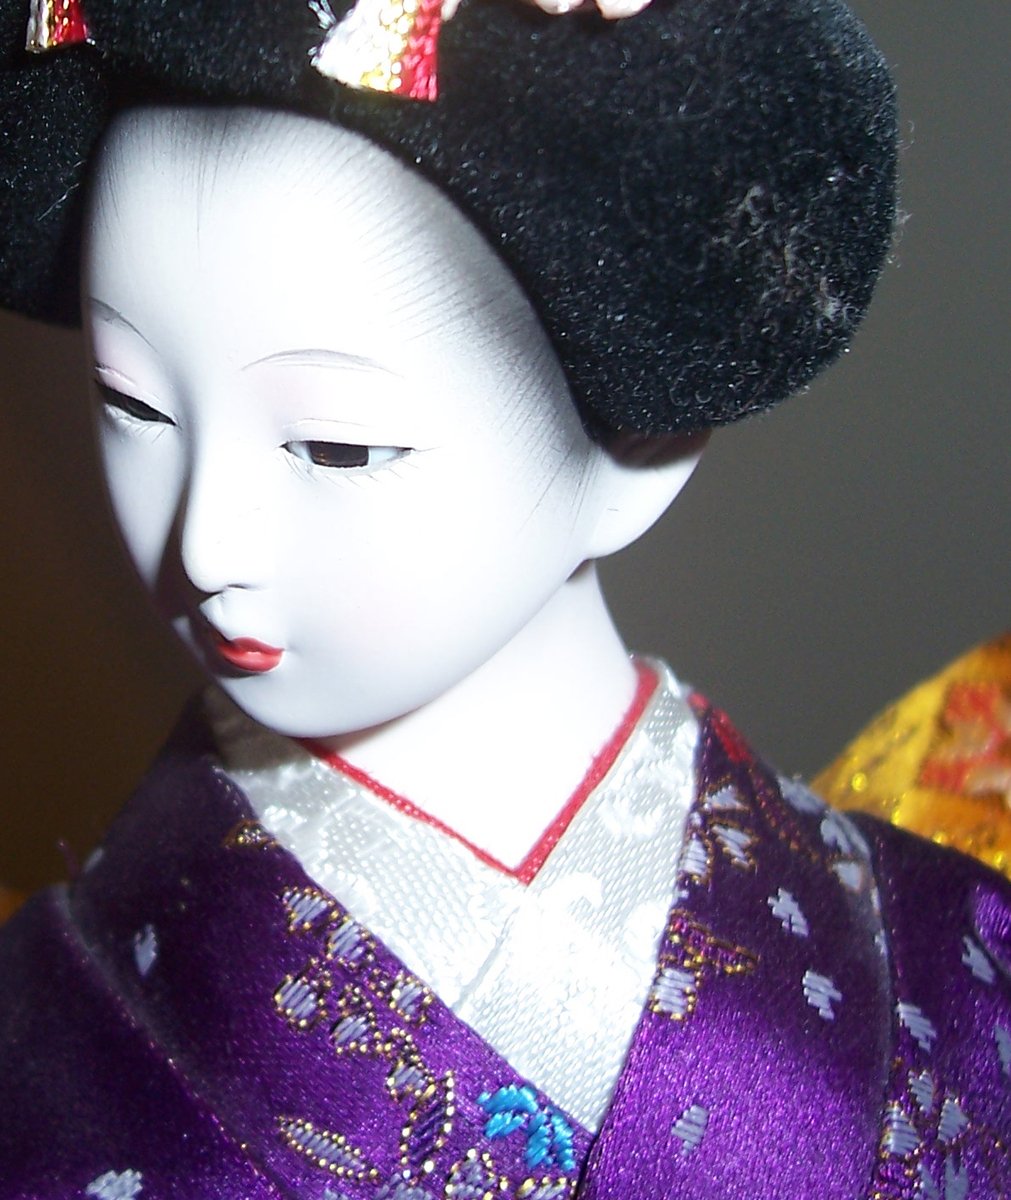 a geisha doll wearing a black hat with flowers